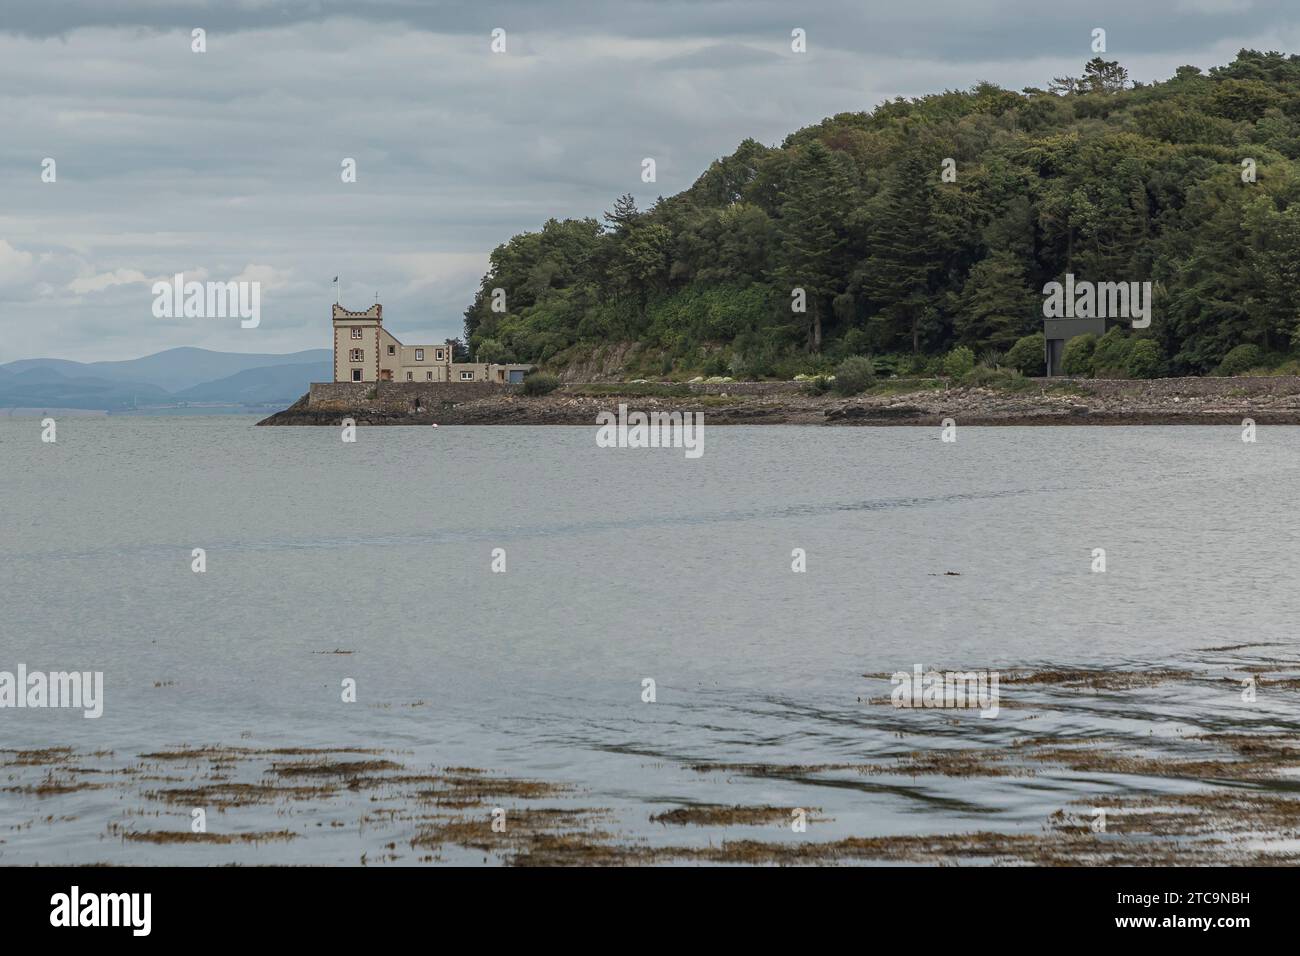 Scotland, United Kingdom - July 24th 2023 - Castle type building on the edge of the sea with the tide in Stock Photo